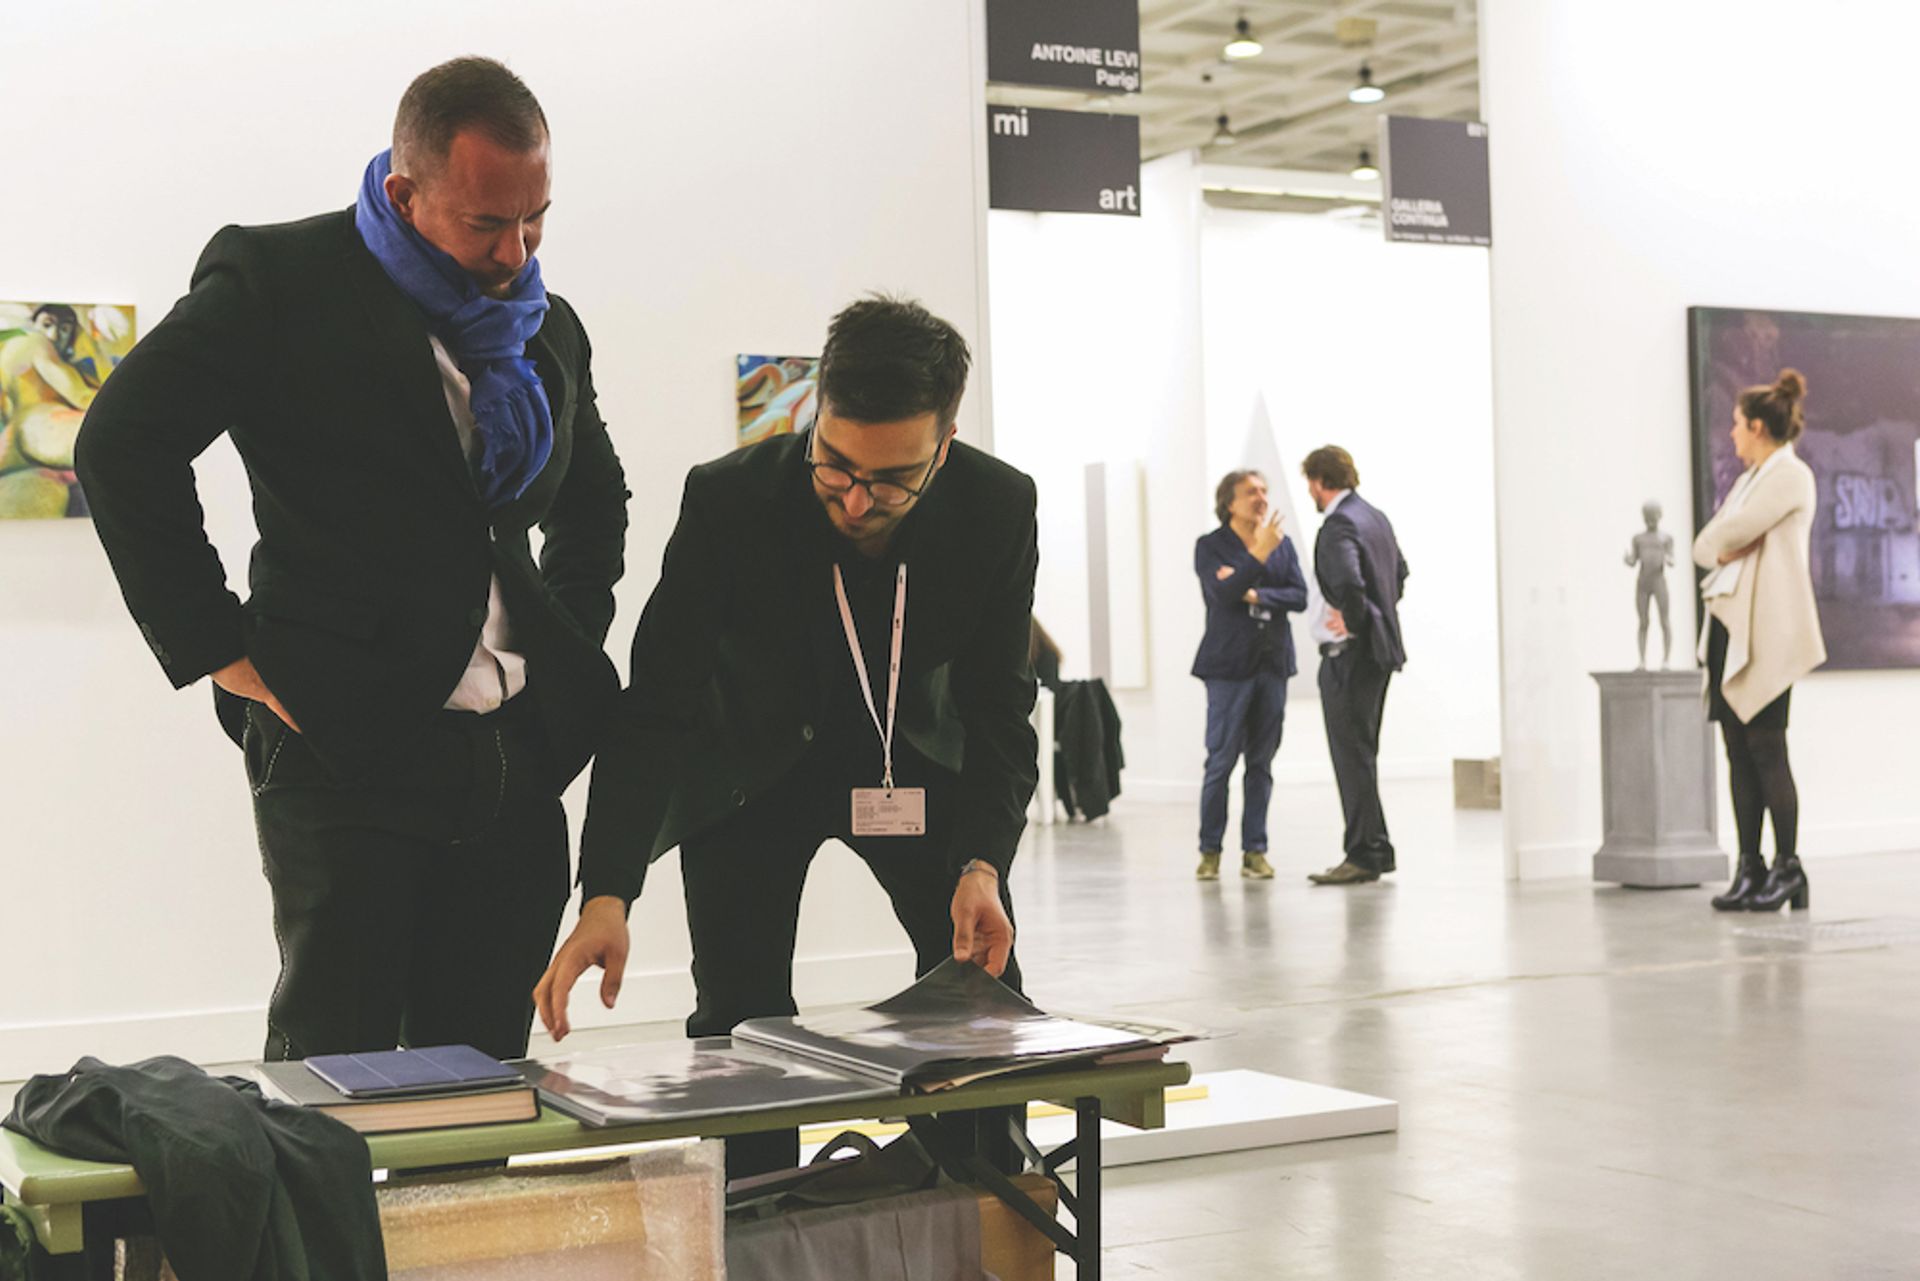 Galleries exhibiting at Miart in Milan last month  welcomed the decision to scrap the resale right on primary market sales, but say it will increase paperwork. © Andrea Rossi